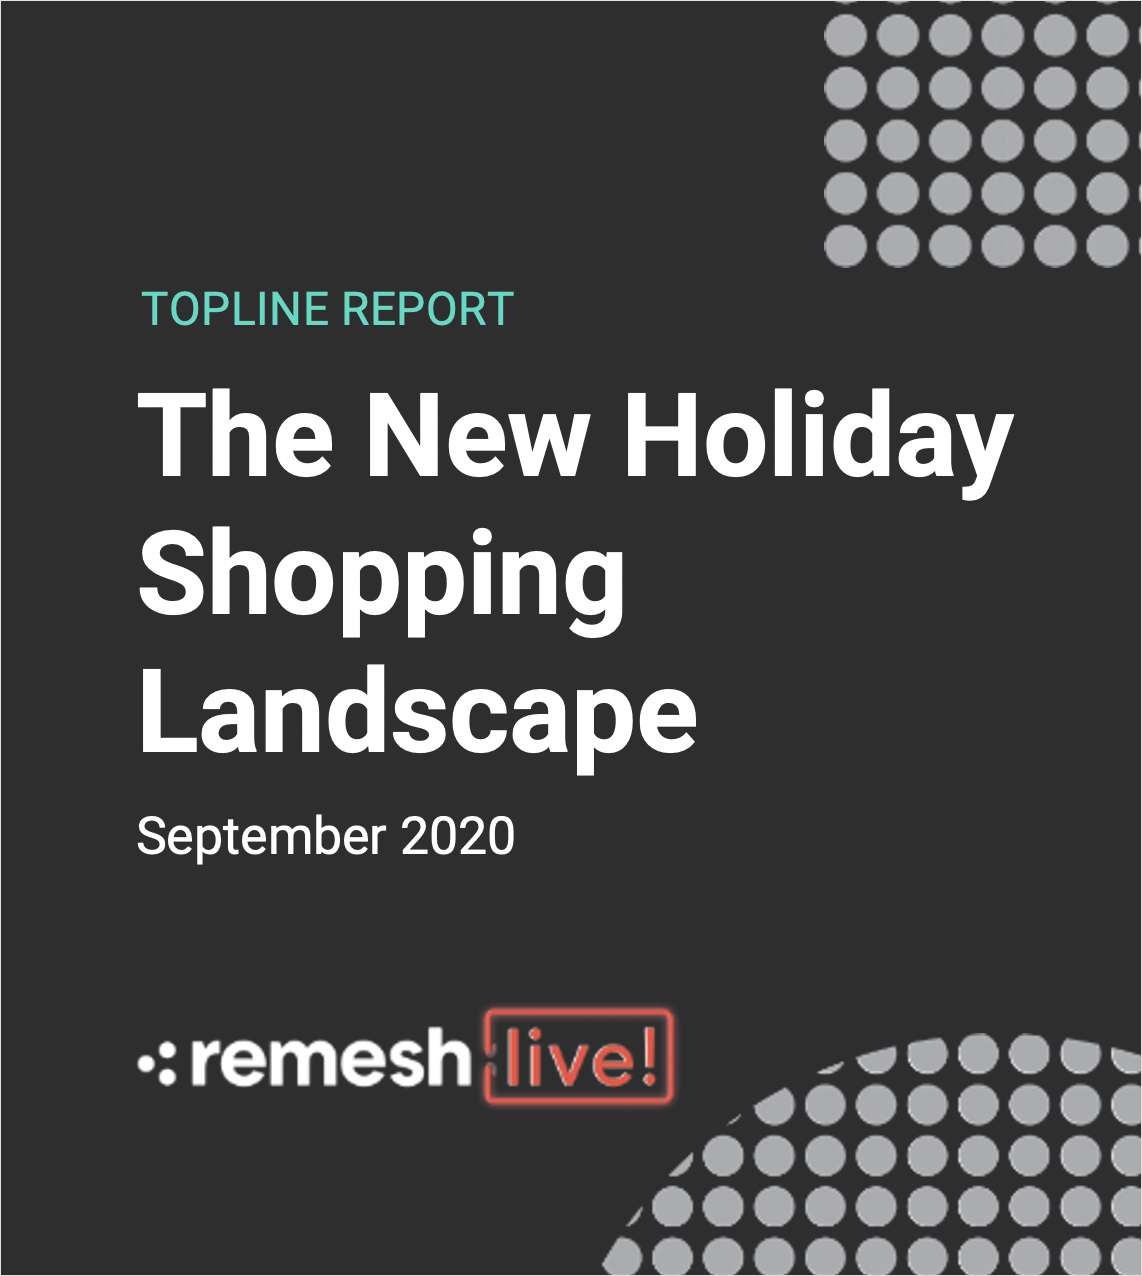 Consumer Spending for the 2020 Holiday Season